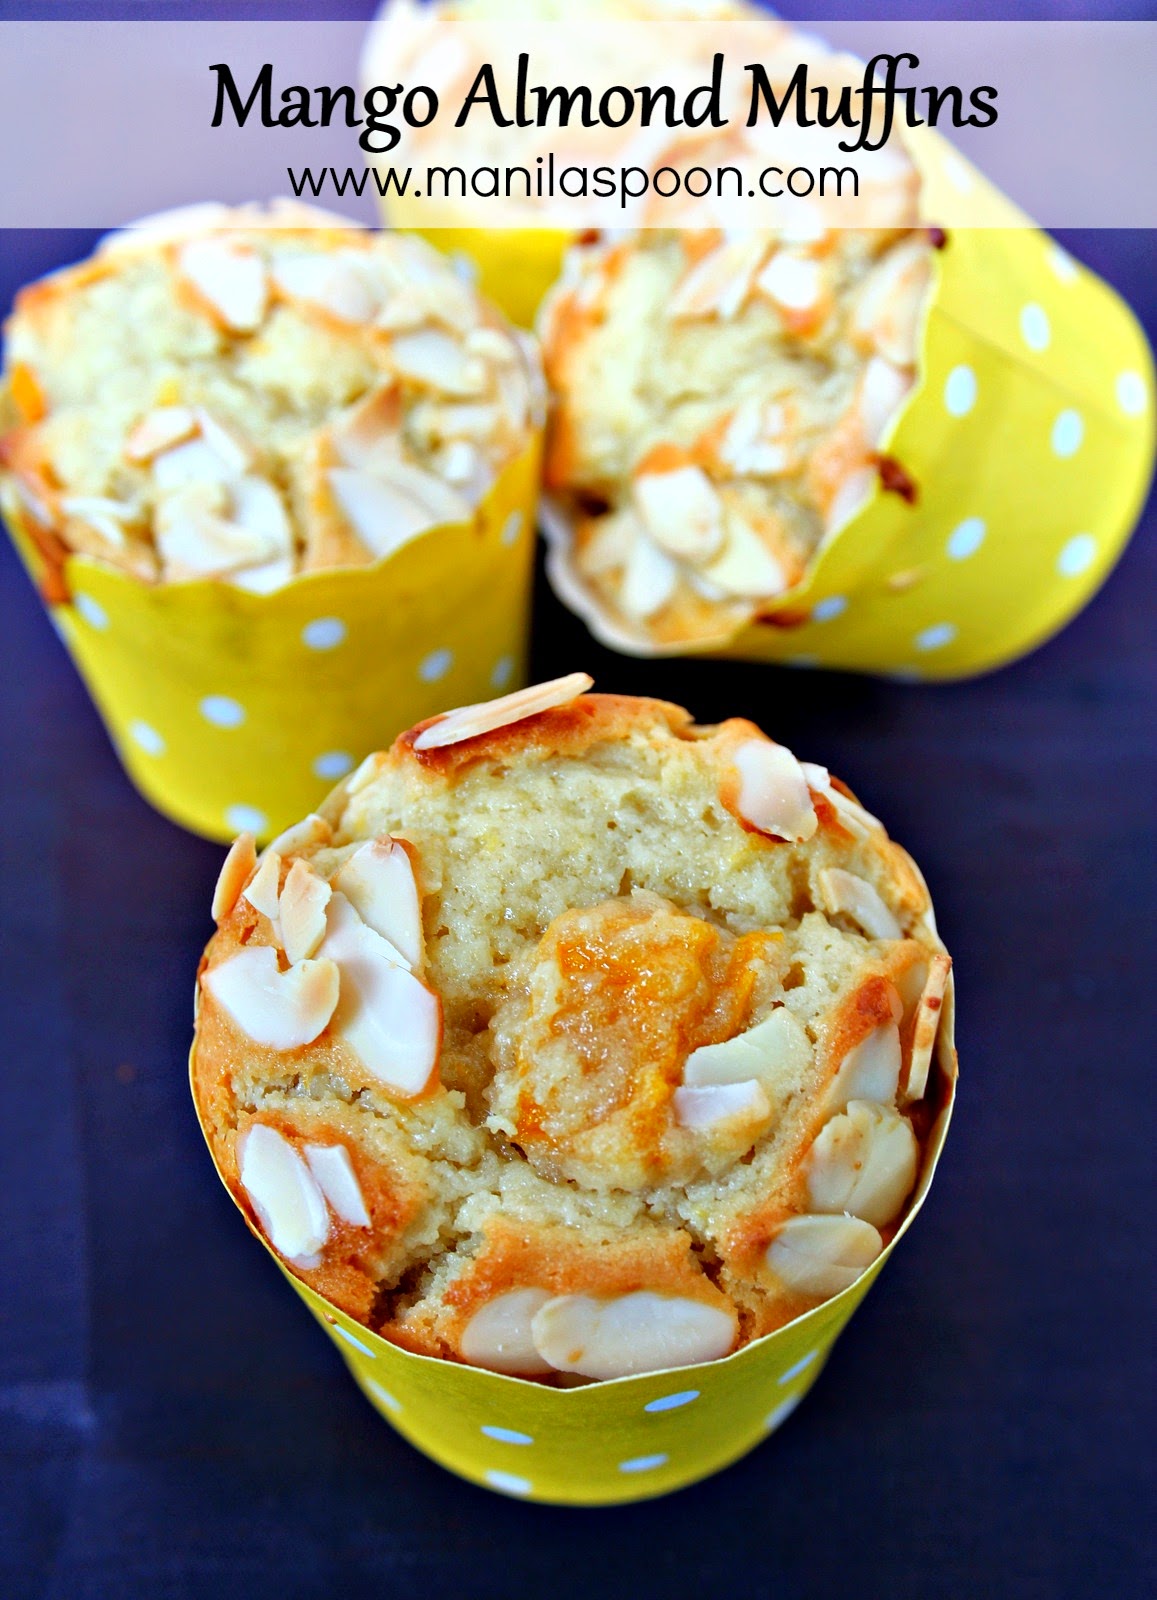 Moist and scrumptious MANGO ALMOND MUFFINS! I have made these a few times already for family and friends and they all love these!